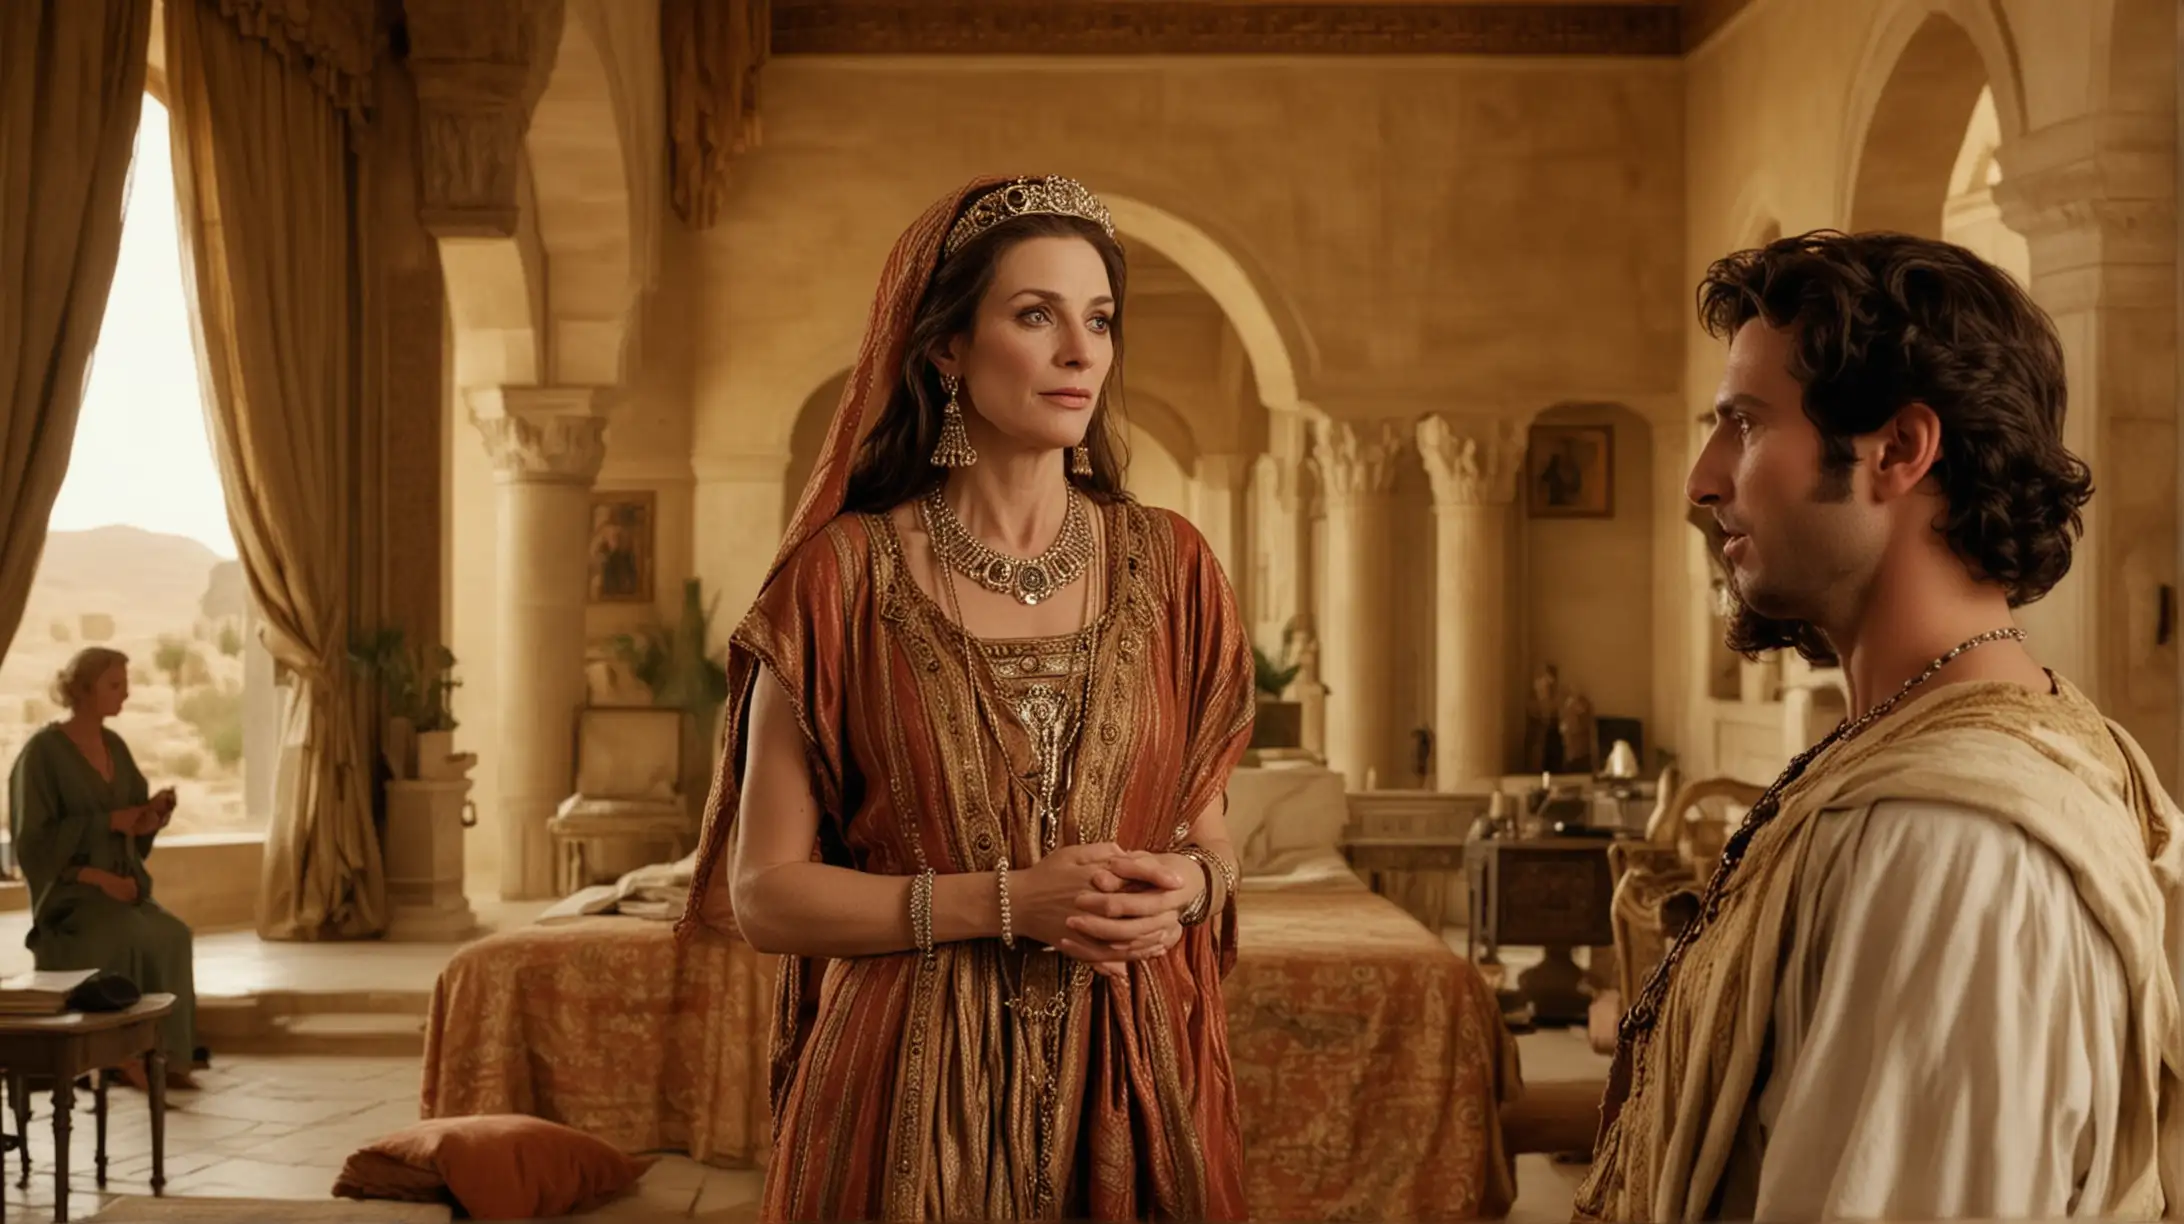  A an attractive 50 year old woman speaks to a handsome King David in a desert Palace room. Set during the biblical era of King David.